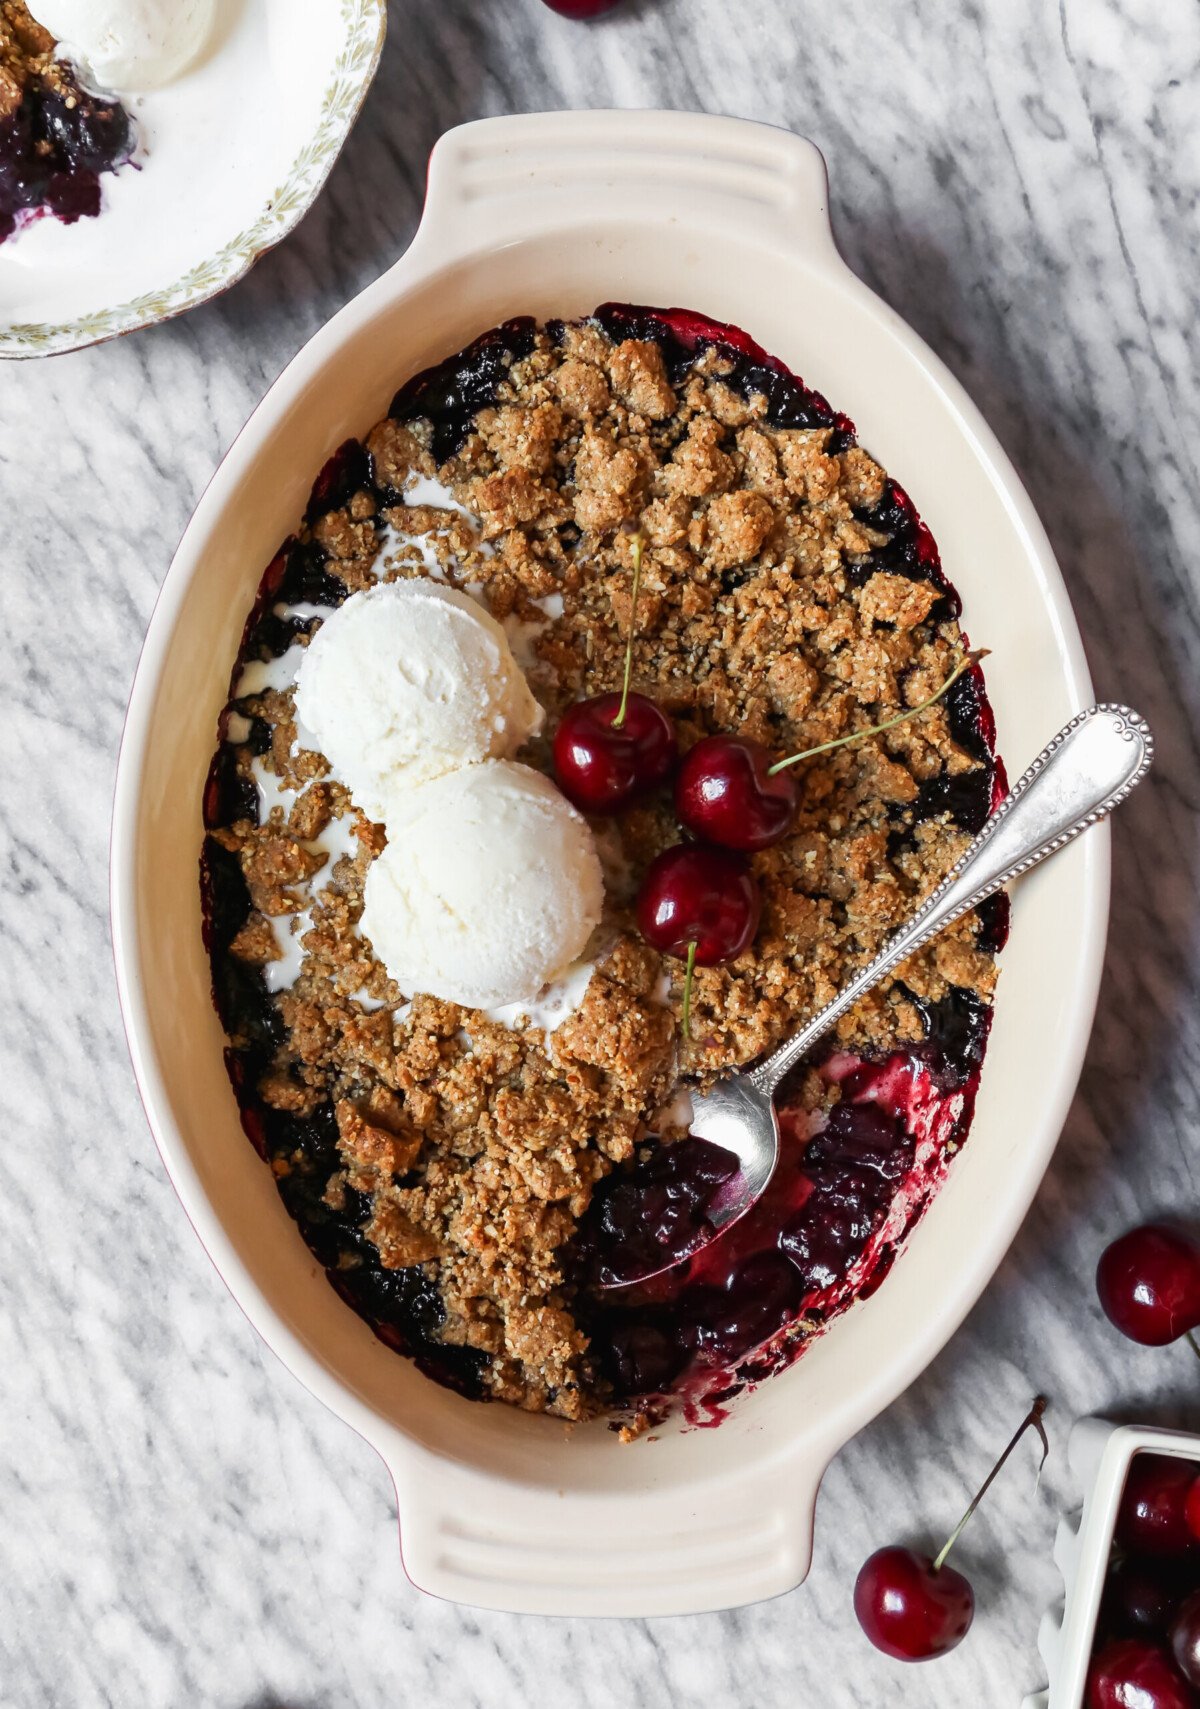 Cherry crisp in an oval baking dish set on a marble surface with servings of cherry crisp and scoops of ice cream in white bowls.